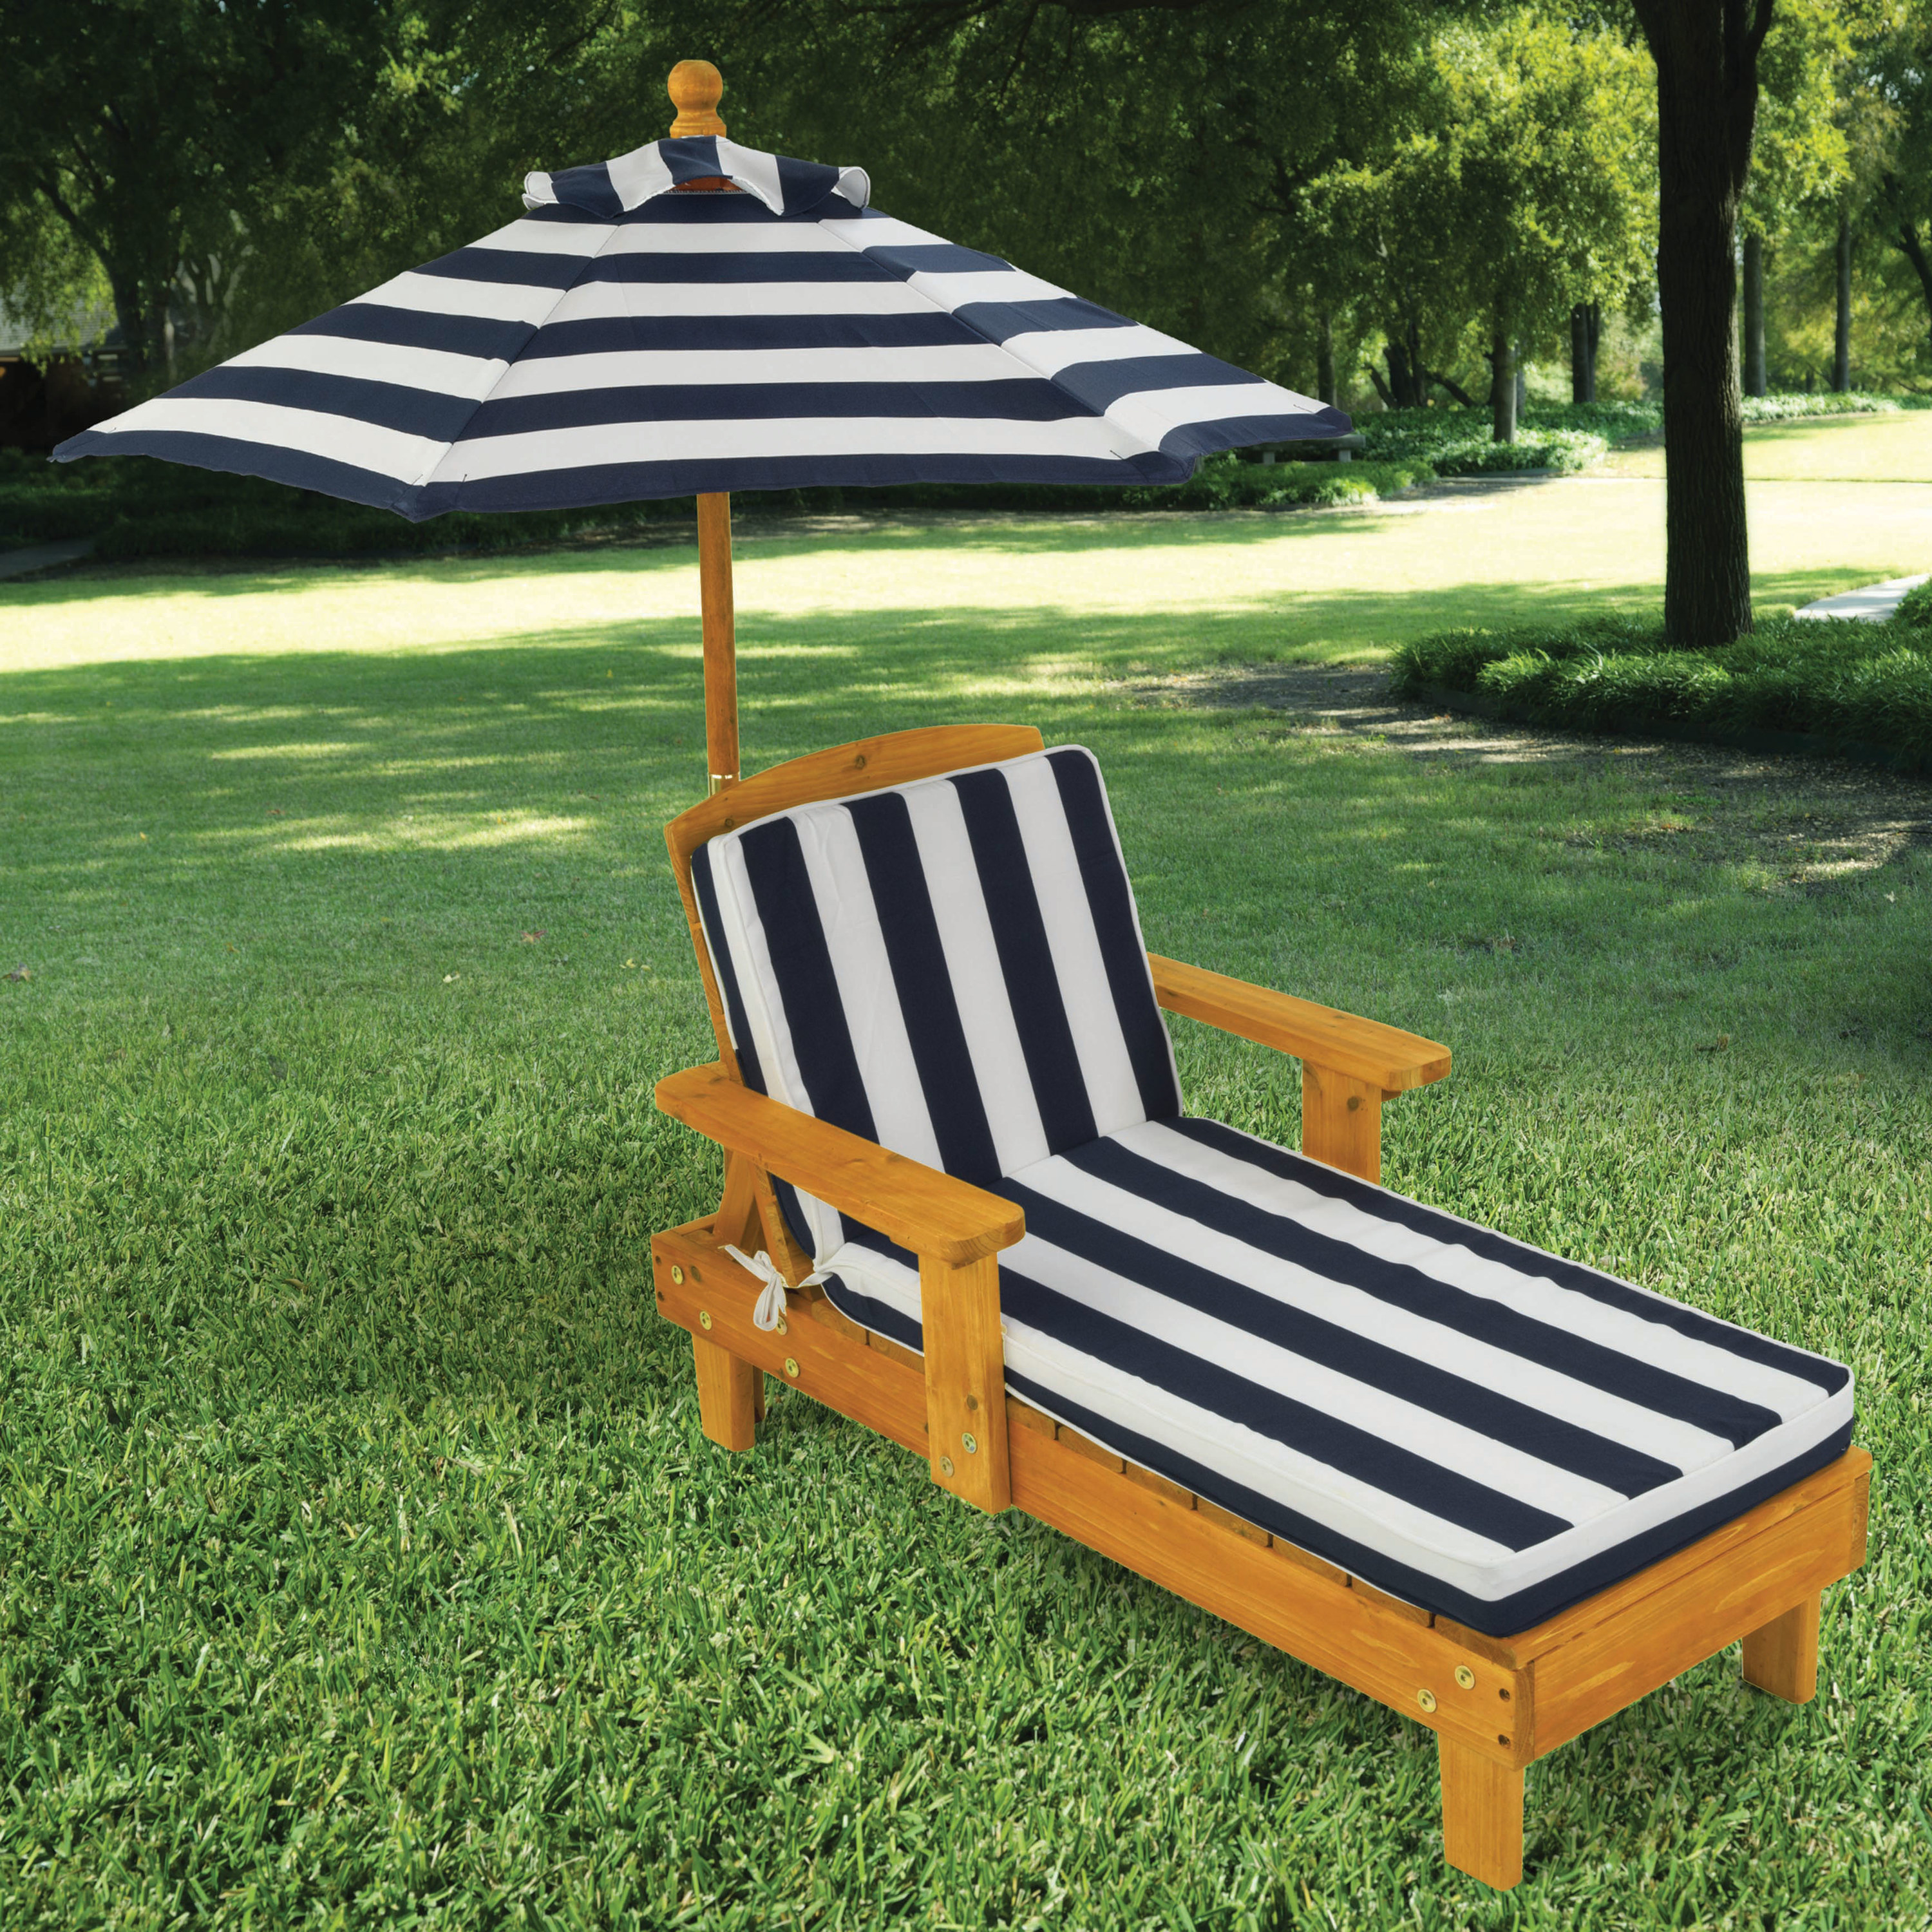 the chaise with an umbrella attached - both in a blue and white vertical print